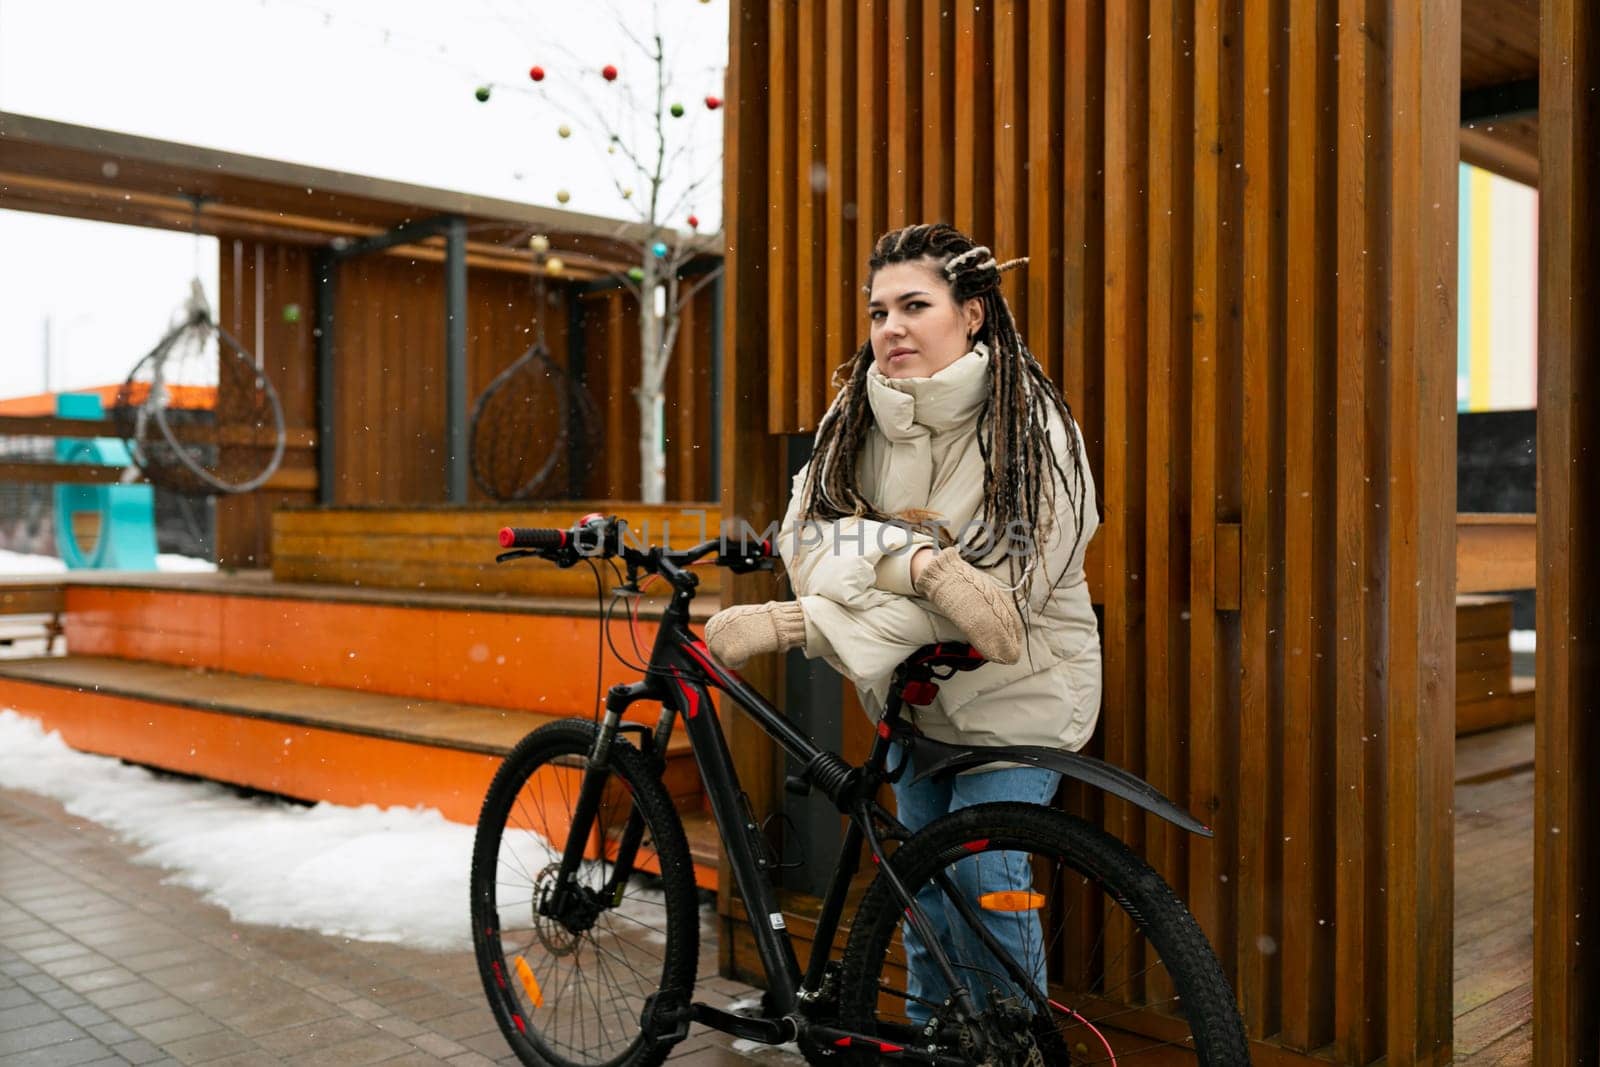 A woman with dreadlocks is seated on a bicycle, appearing relaxed and confident. She is wearing casual clothing, and the bike is stationary in an urban setting. The focus is on her unique hair and the mode of transportation she is using.